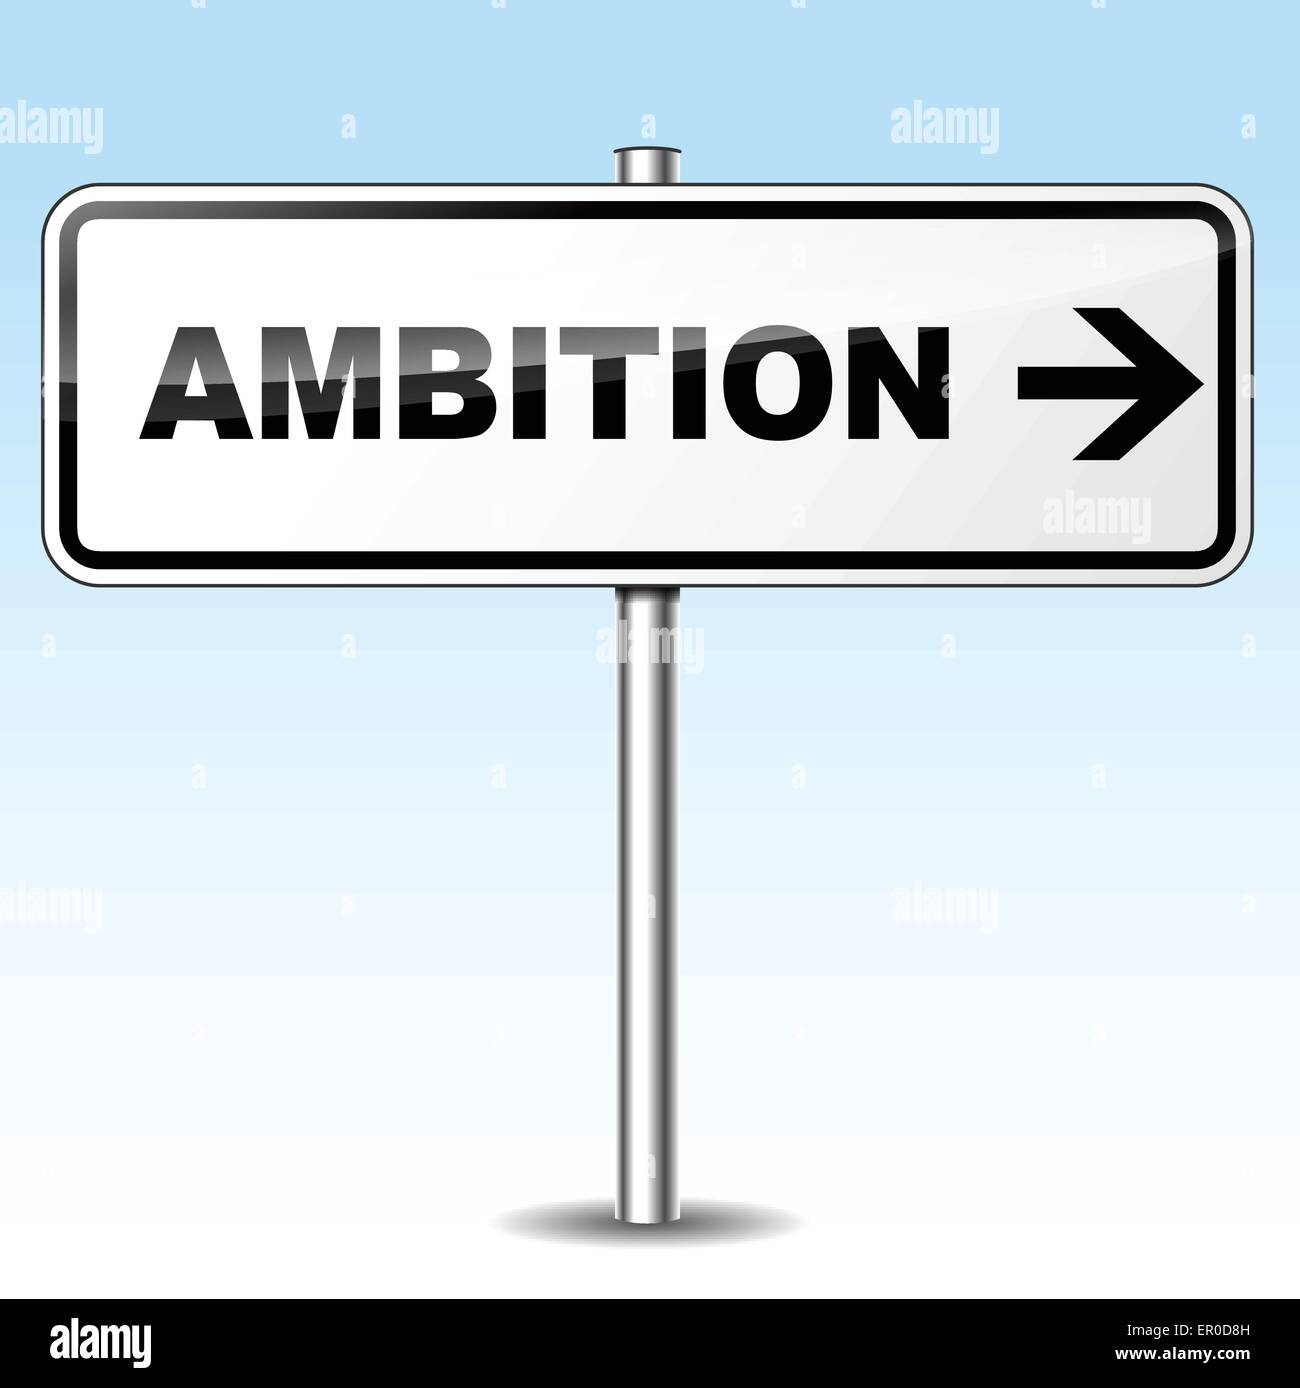 Illustration of ambition sign on sky background Stock Vector